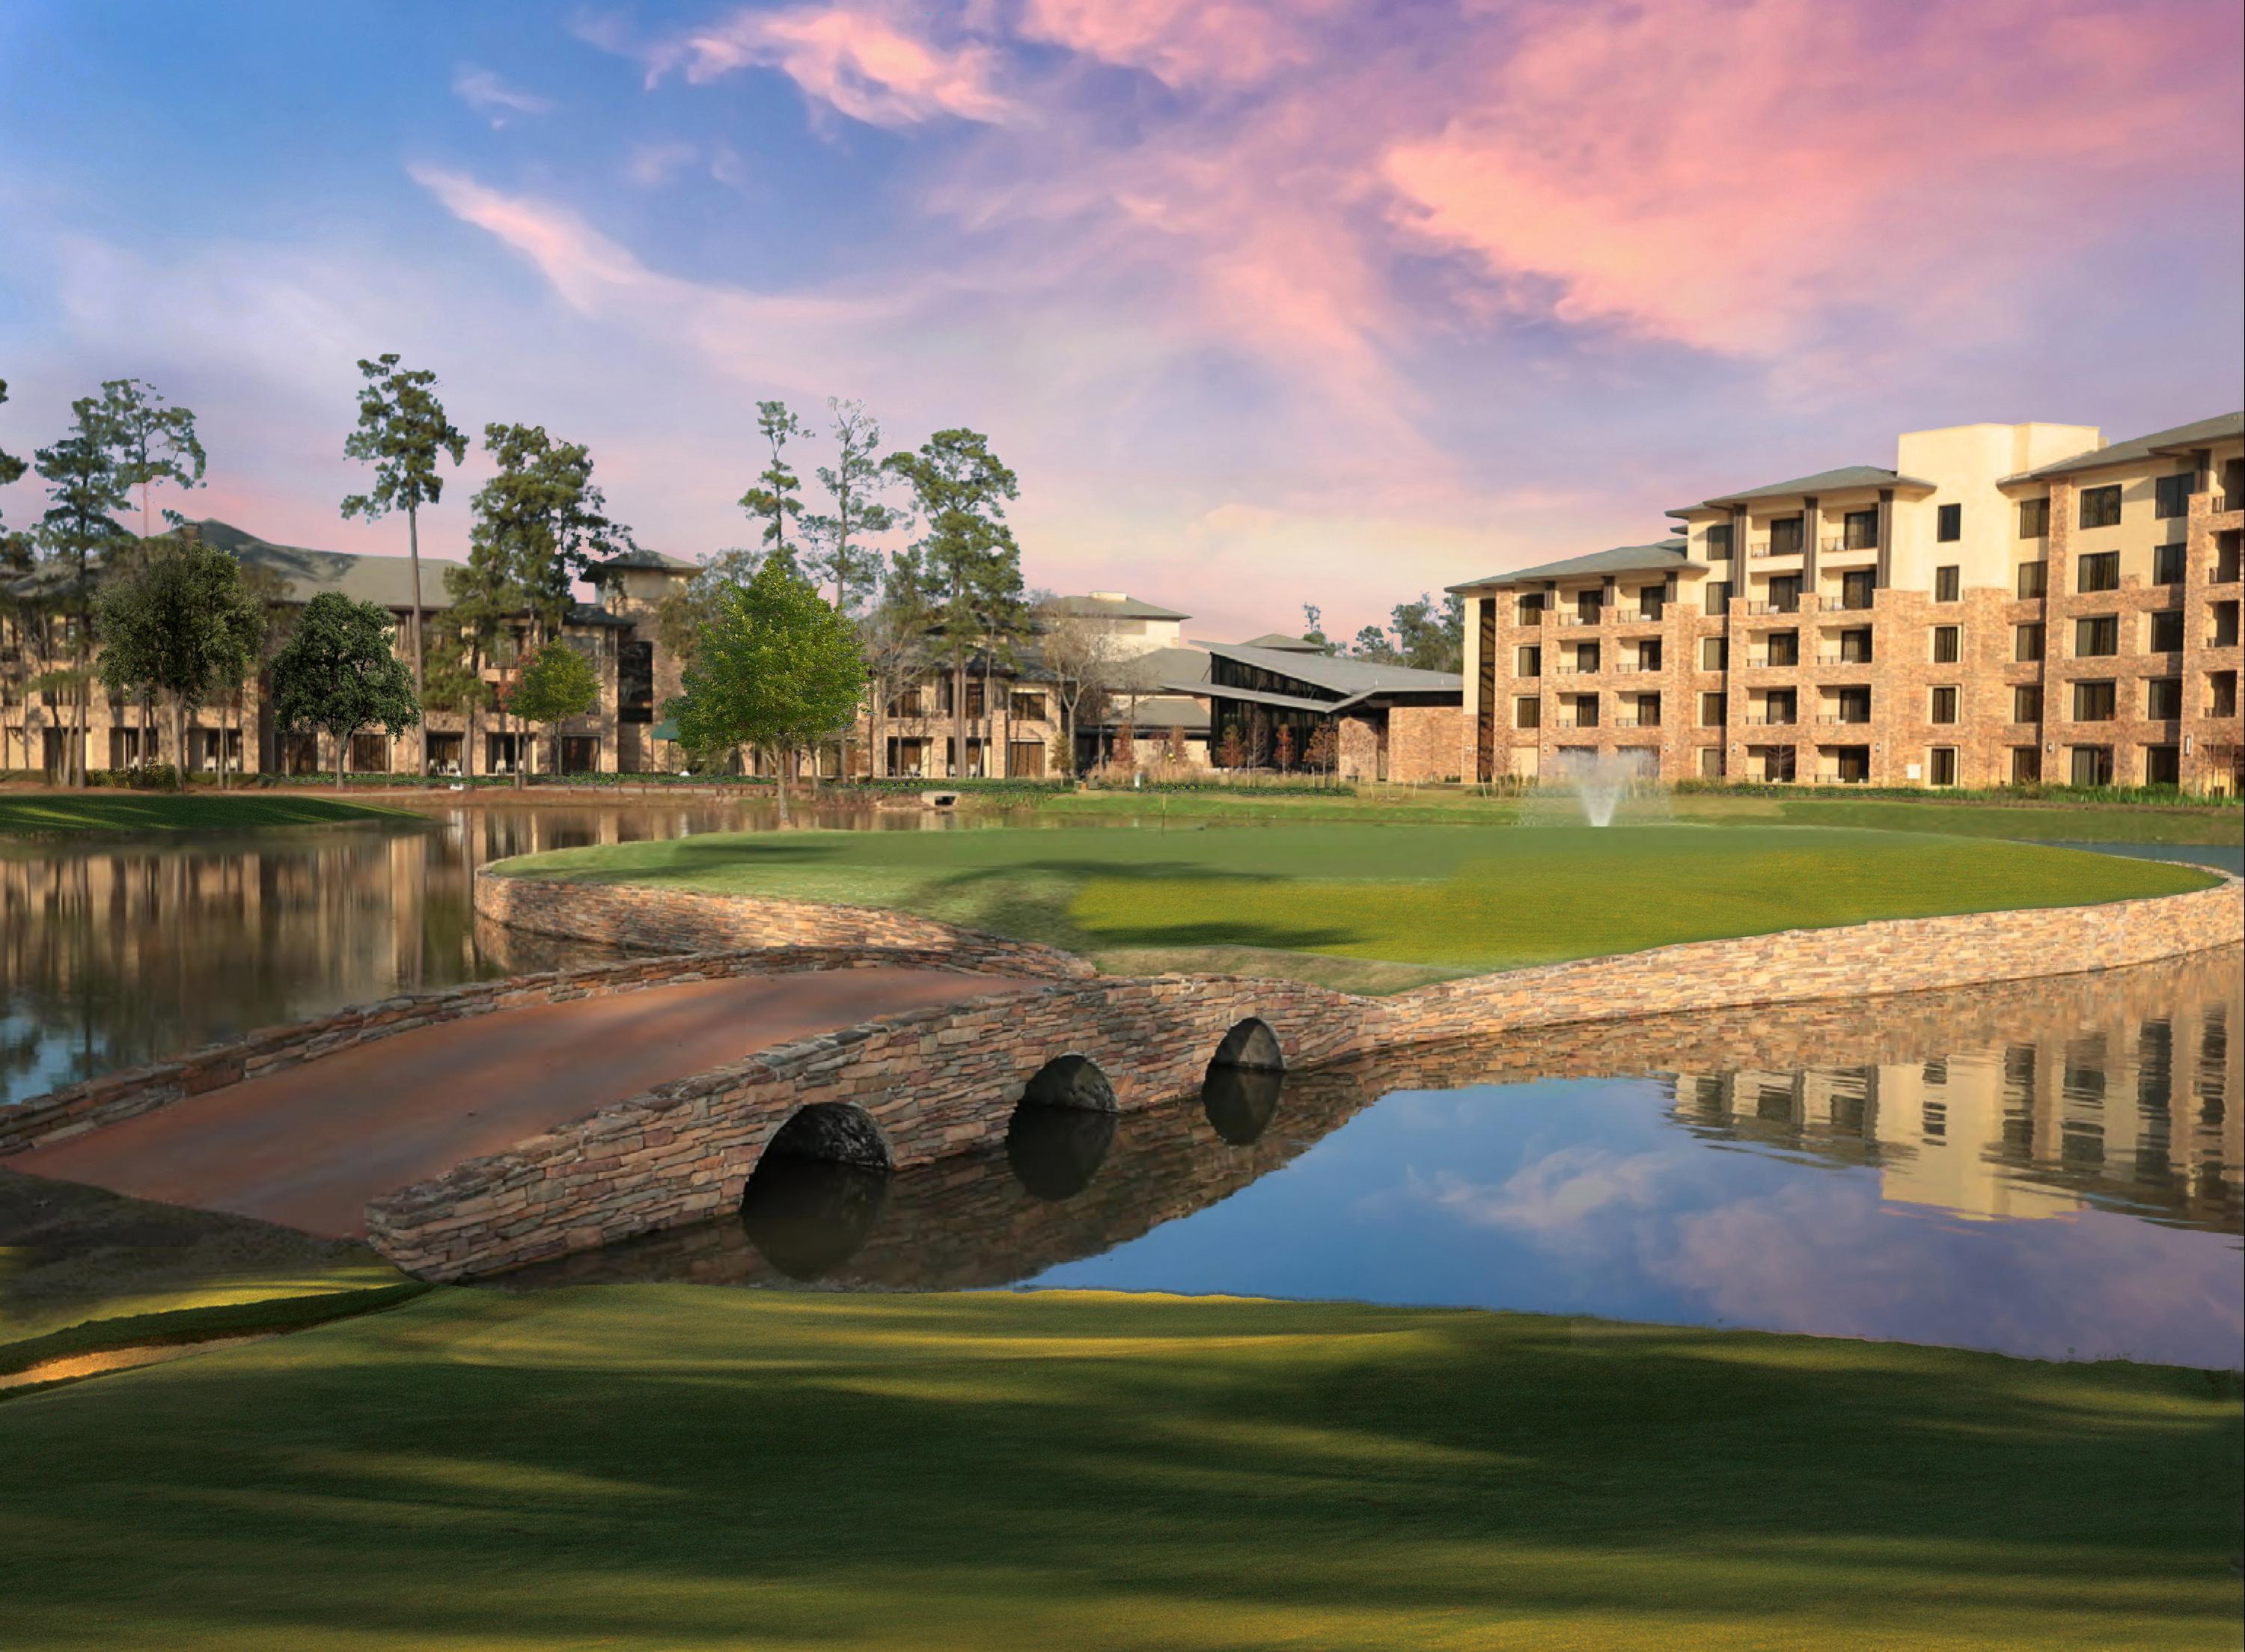 The Woodlands Resort from $374. The Woodlands Resorts - KAYAK